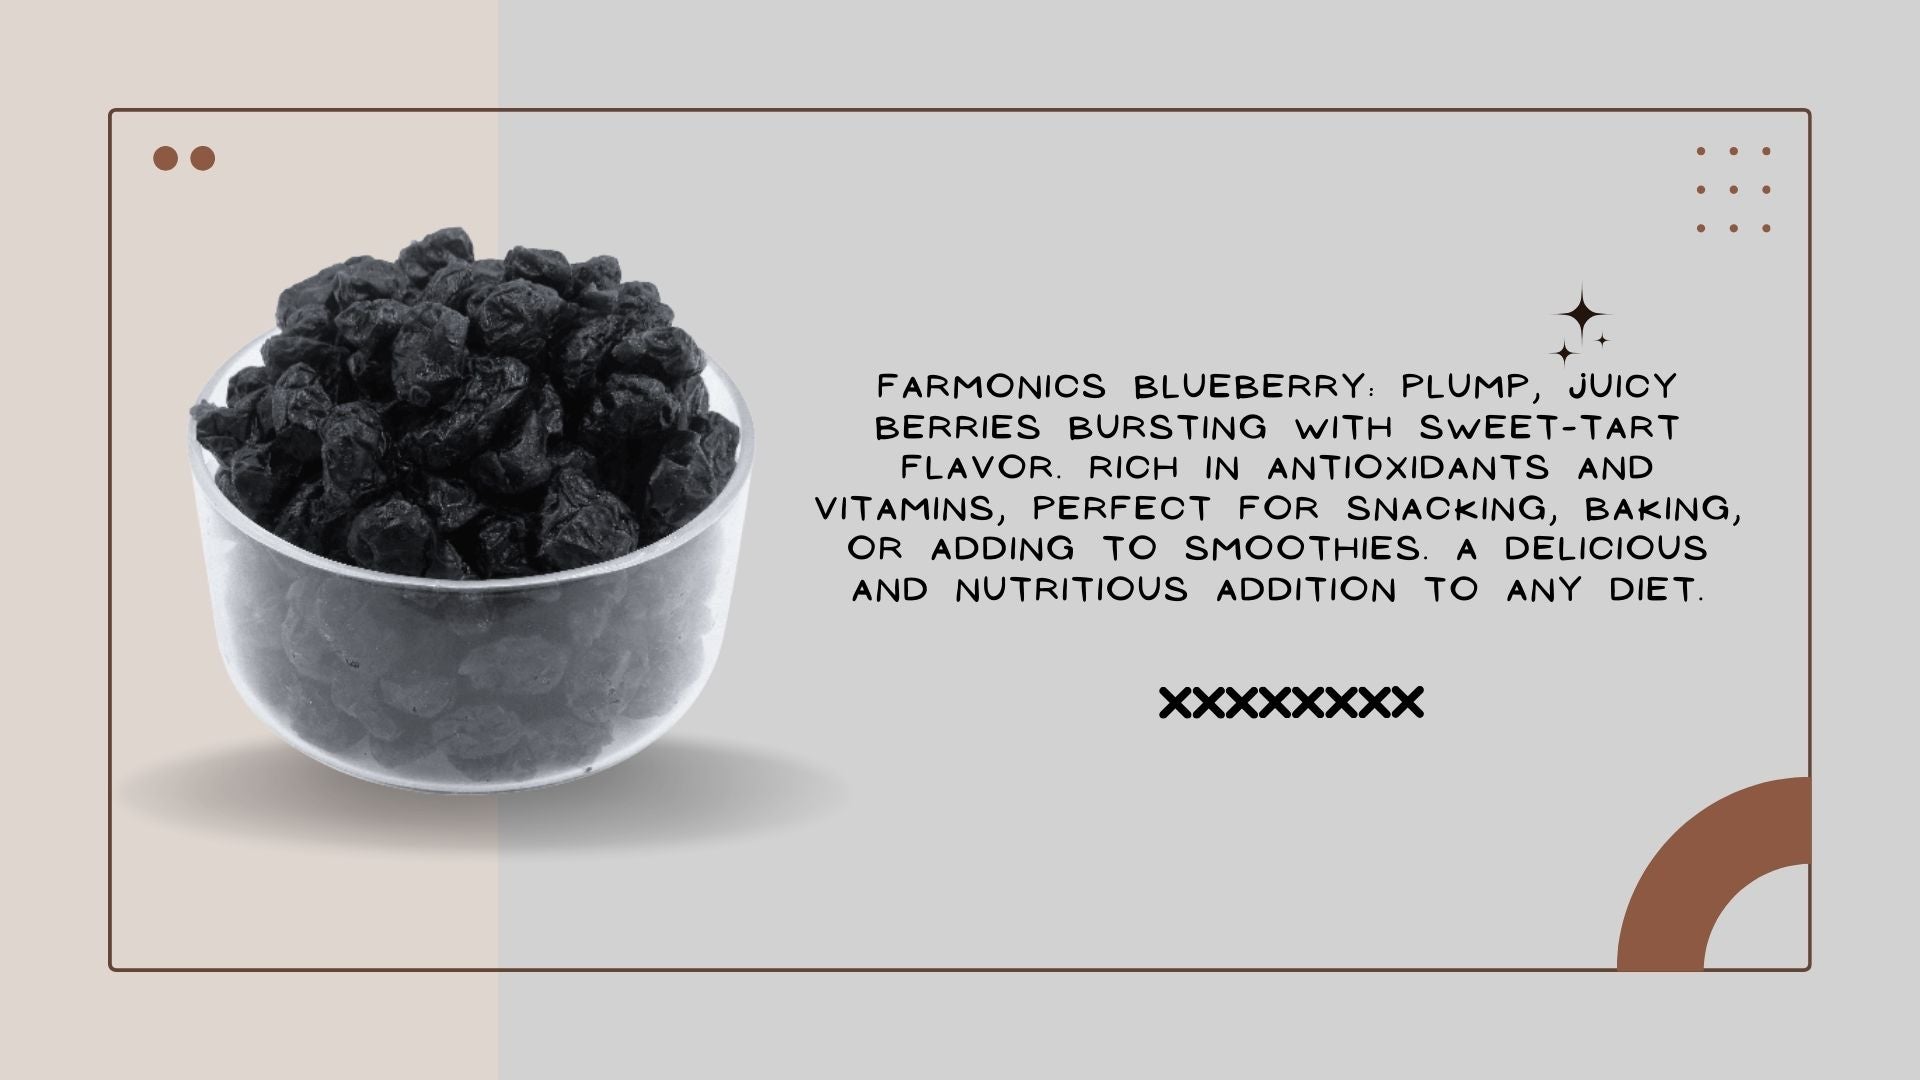 here are some of the information about farmonics blueberry 